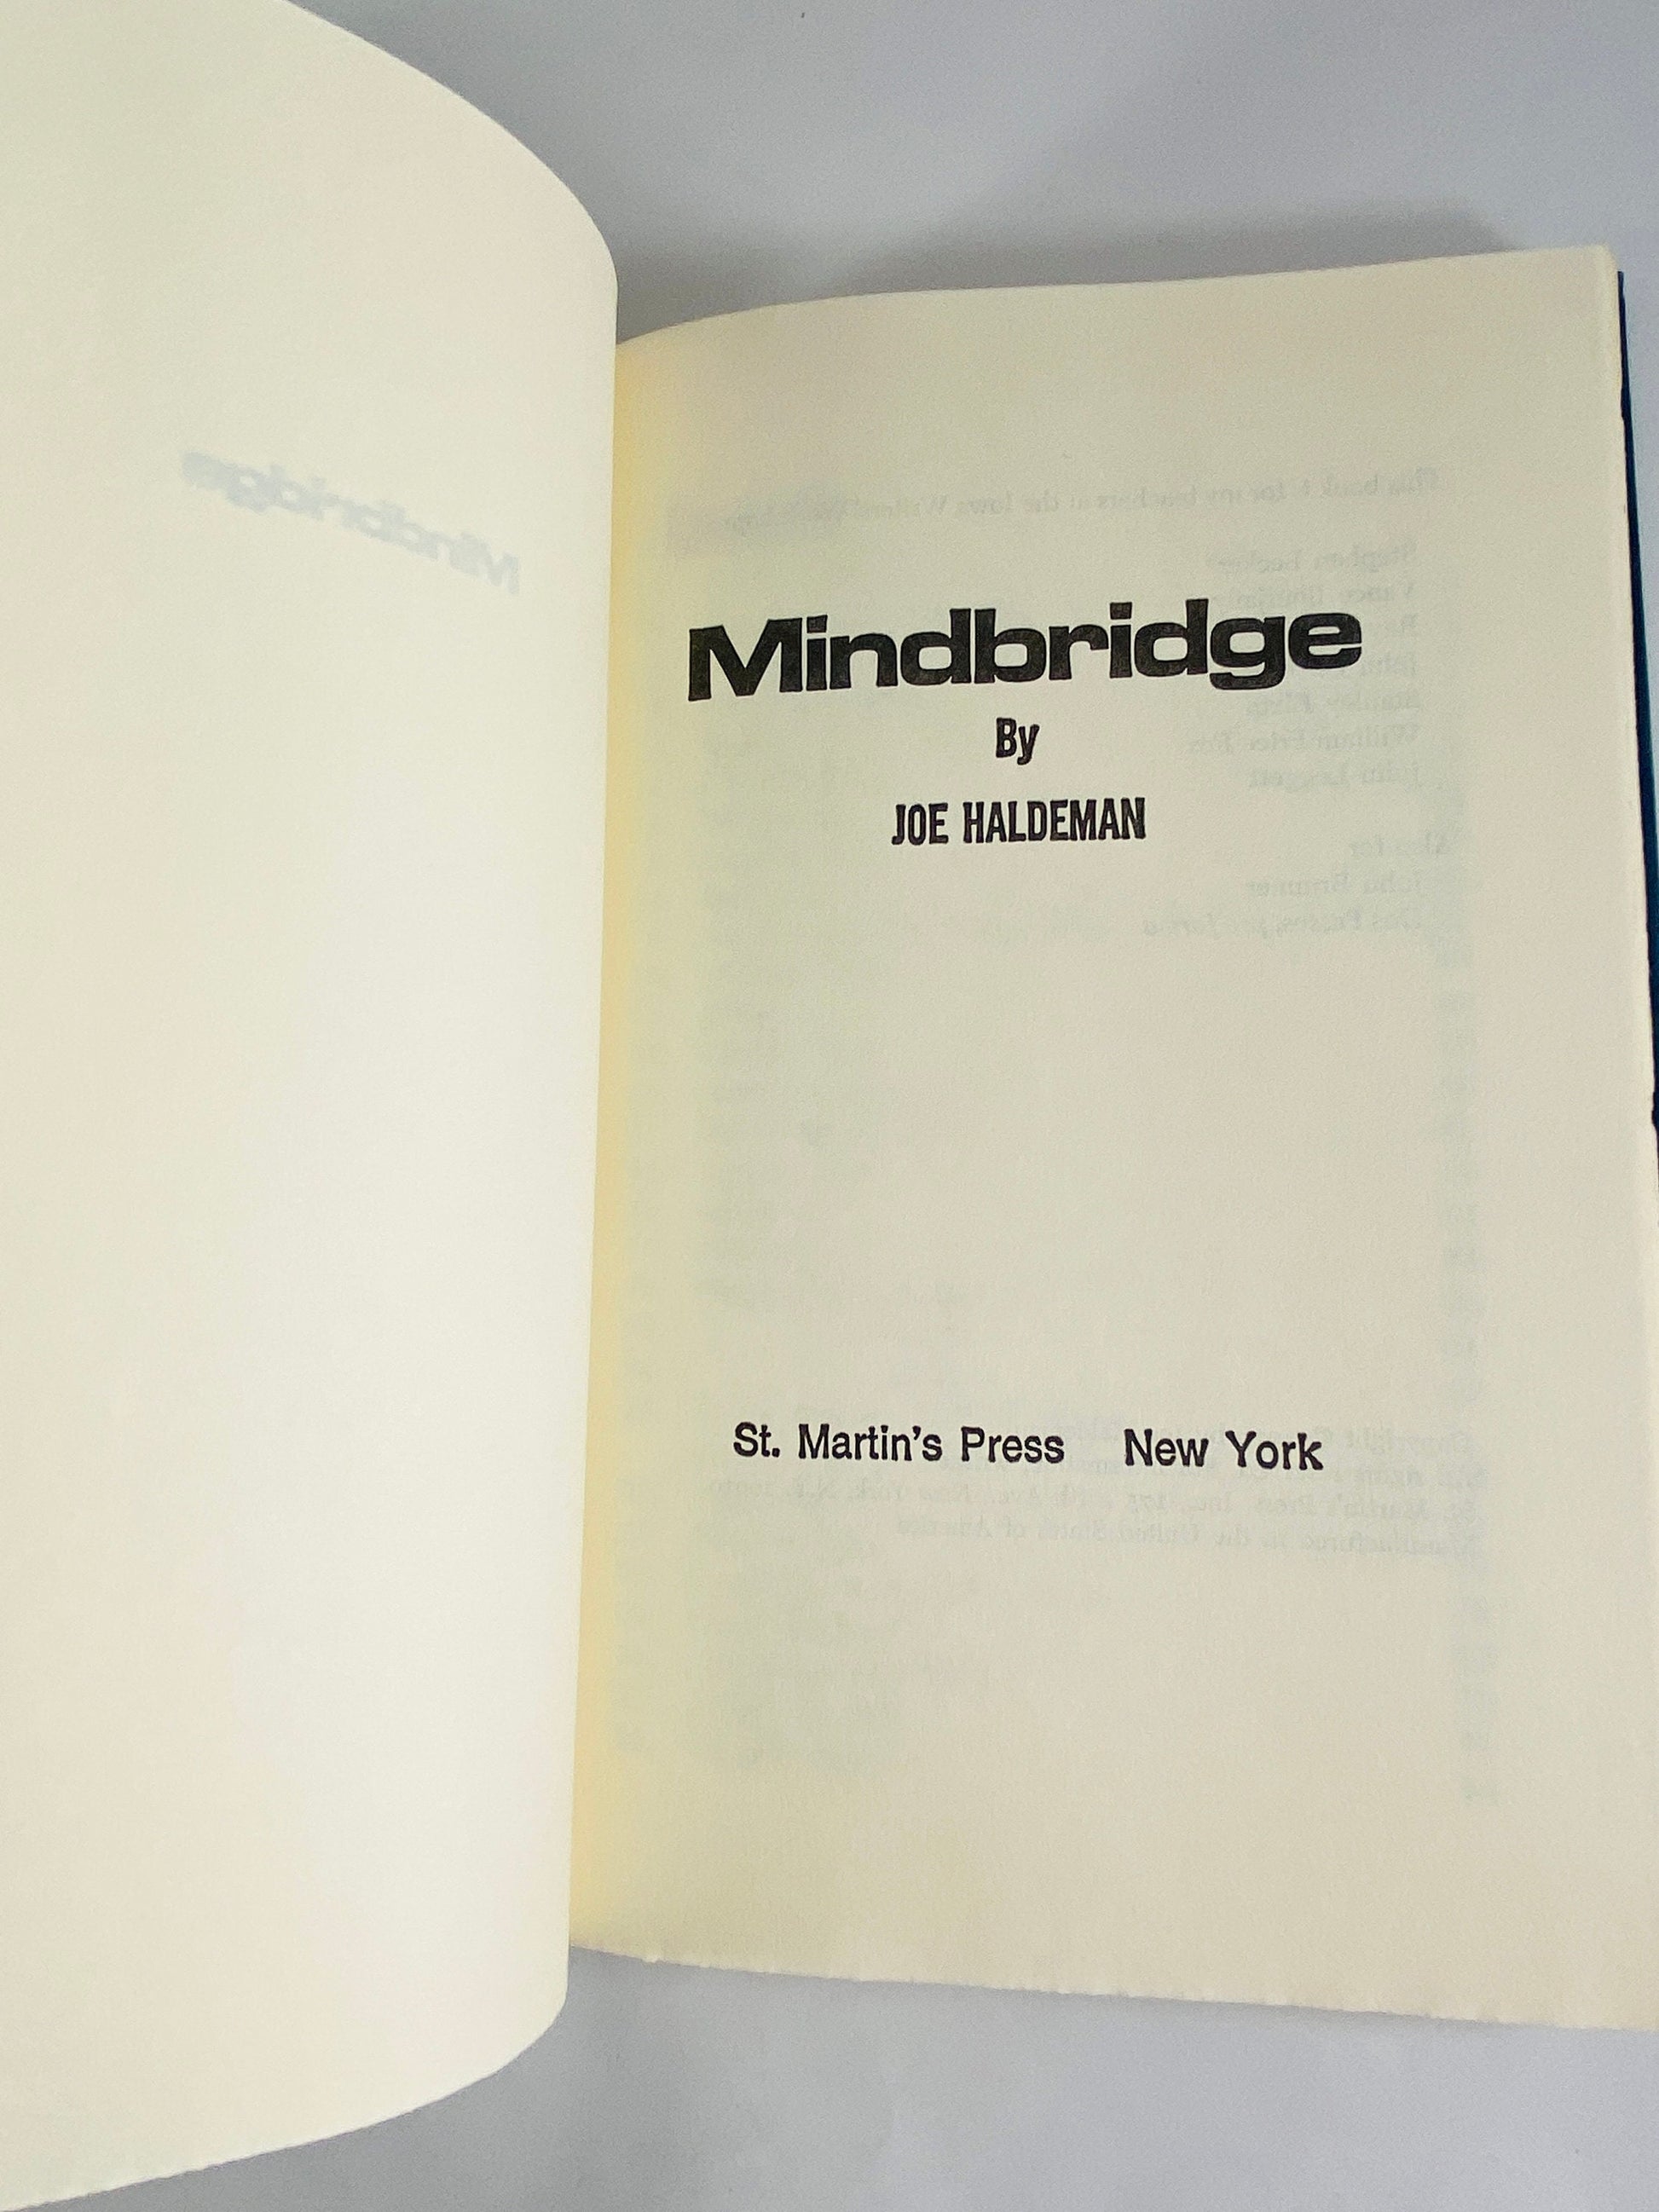 1976 Mindbridge by Joe Haldeman vintage scifi book about the discovery of a remarkable alien technology light years from Earth